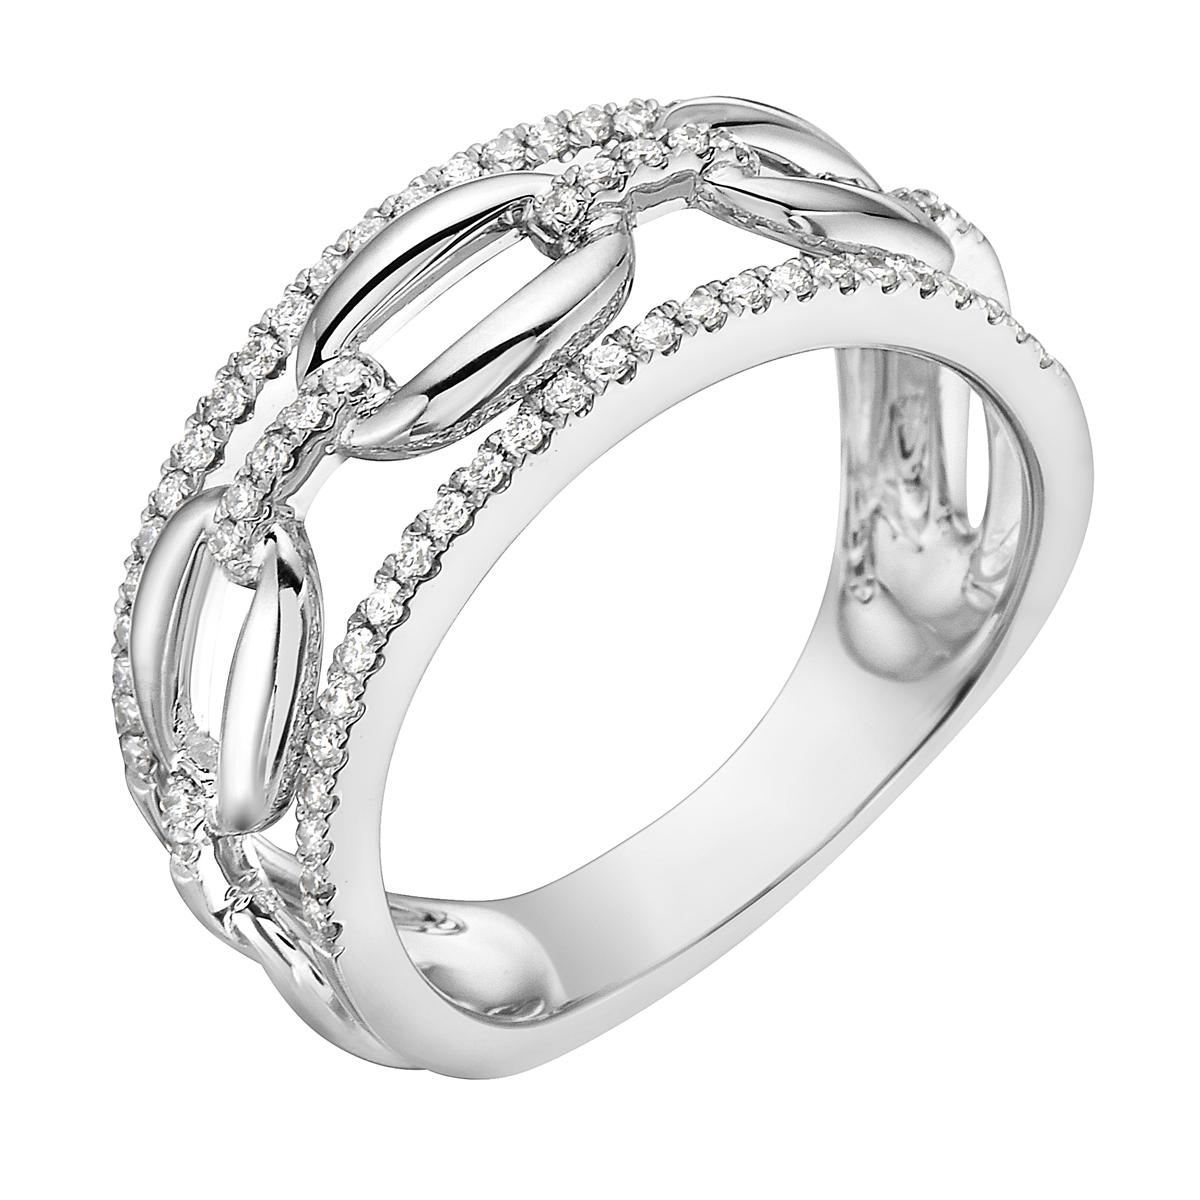 With this exquisite channel set chain link diamond ring, style and glamour are in the spotlight. This 14 karat white gold diamond ring is made from 4.7 grams of gold and is covered in 64 round SI1-SI2, GH color diamonds totaling 0.36ct. This ring is